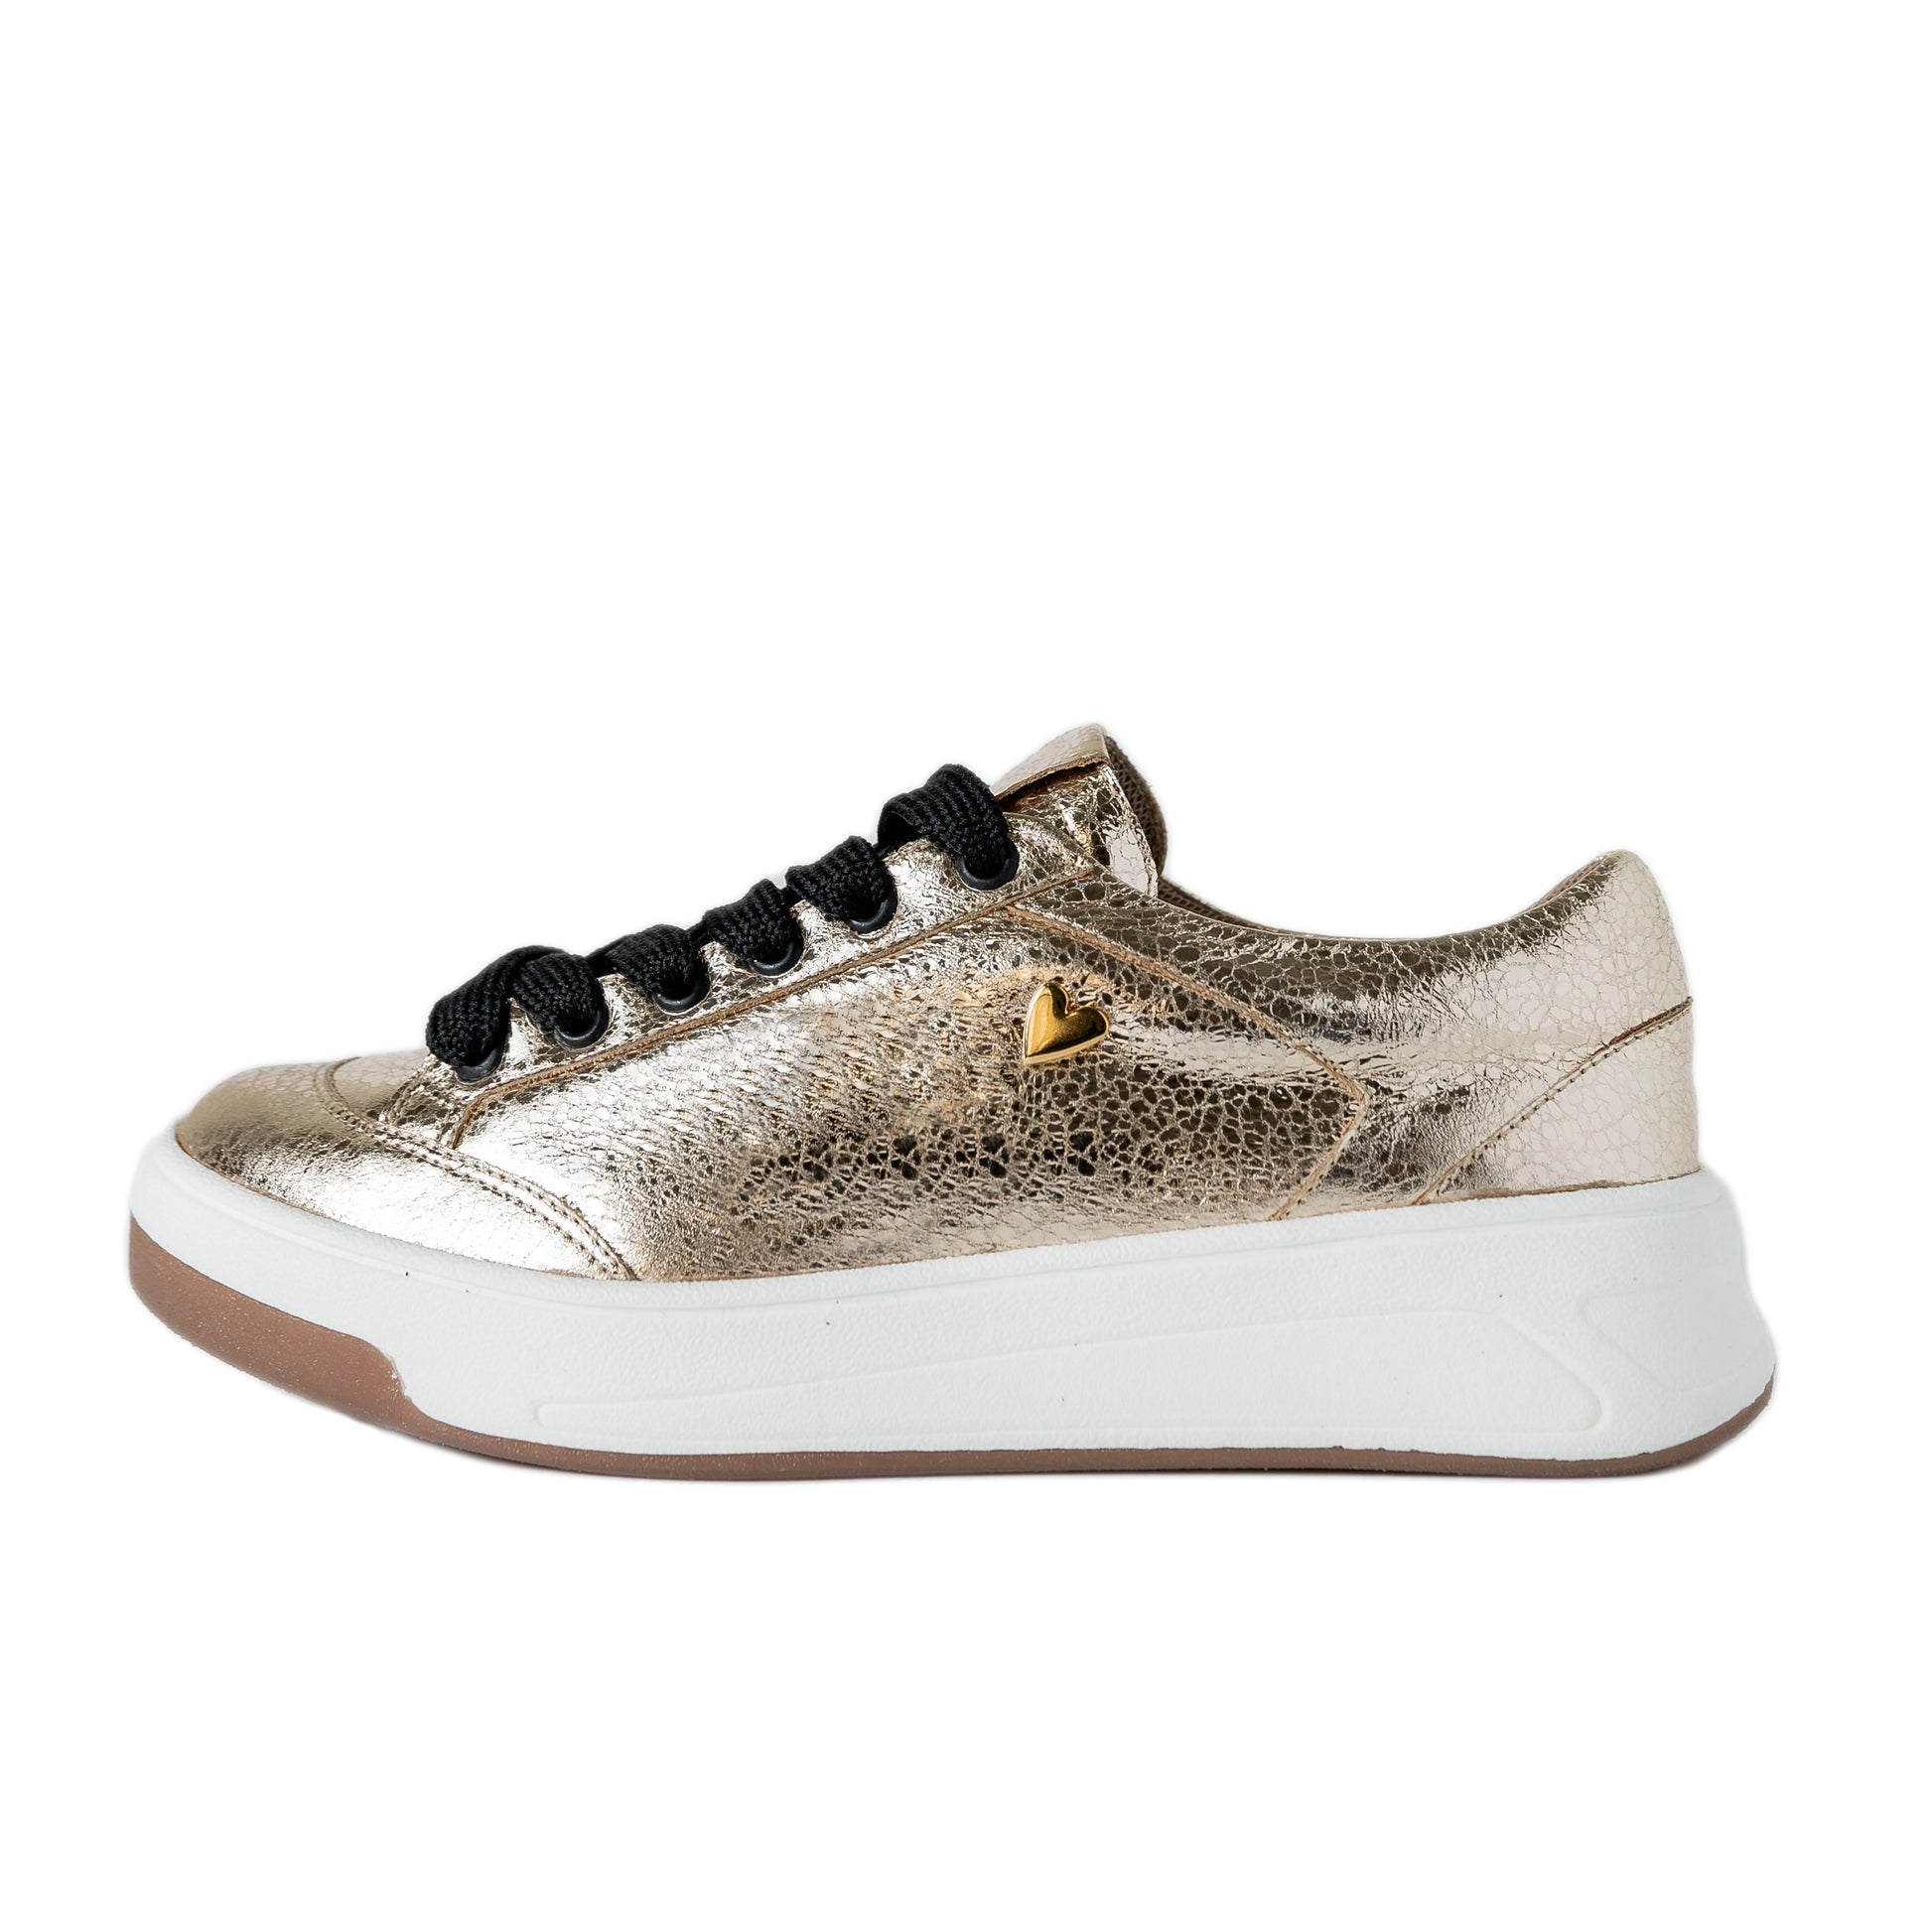 Krista Sneakers - Gold - Genuine Leather